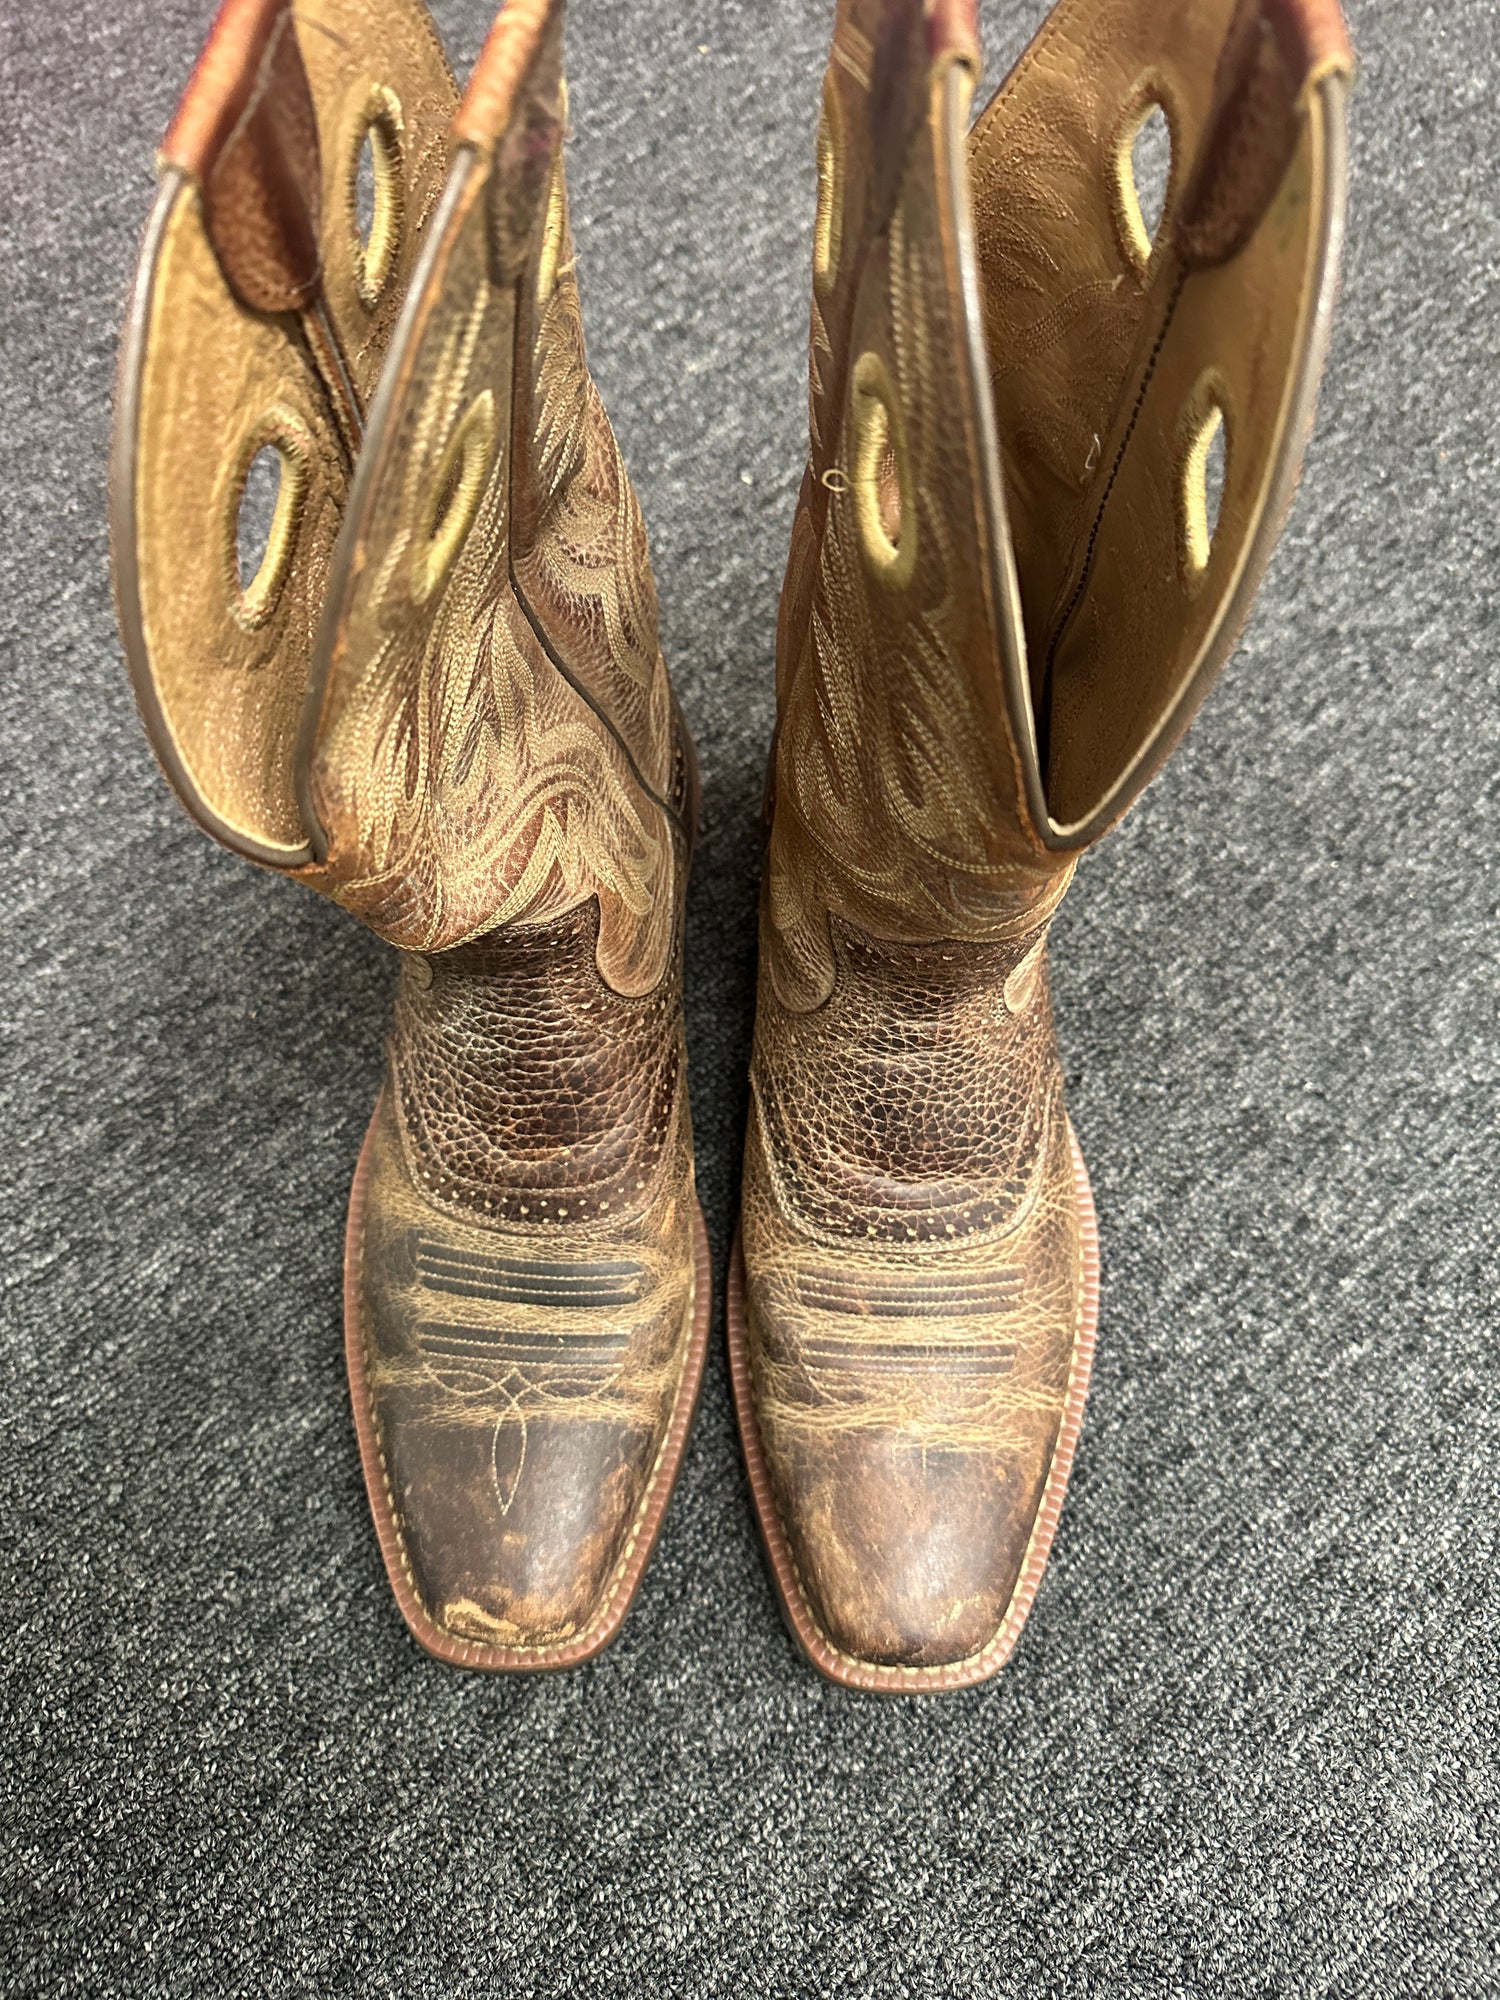 Ariat Western Boots Size 8D